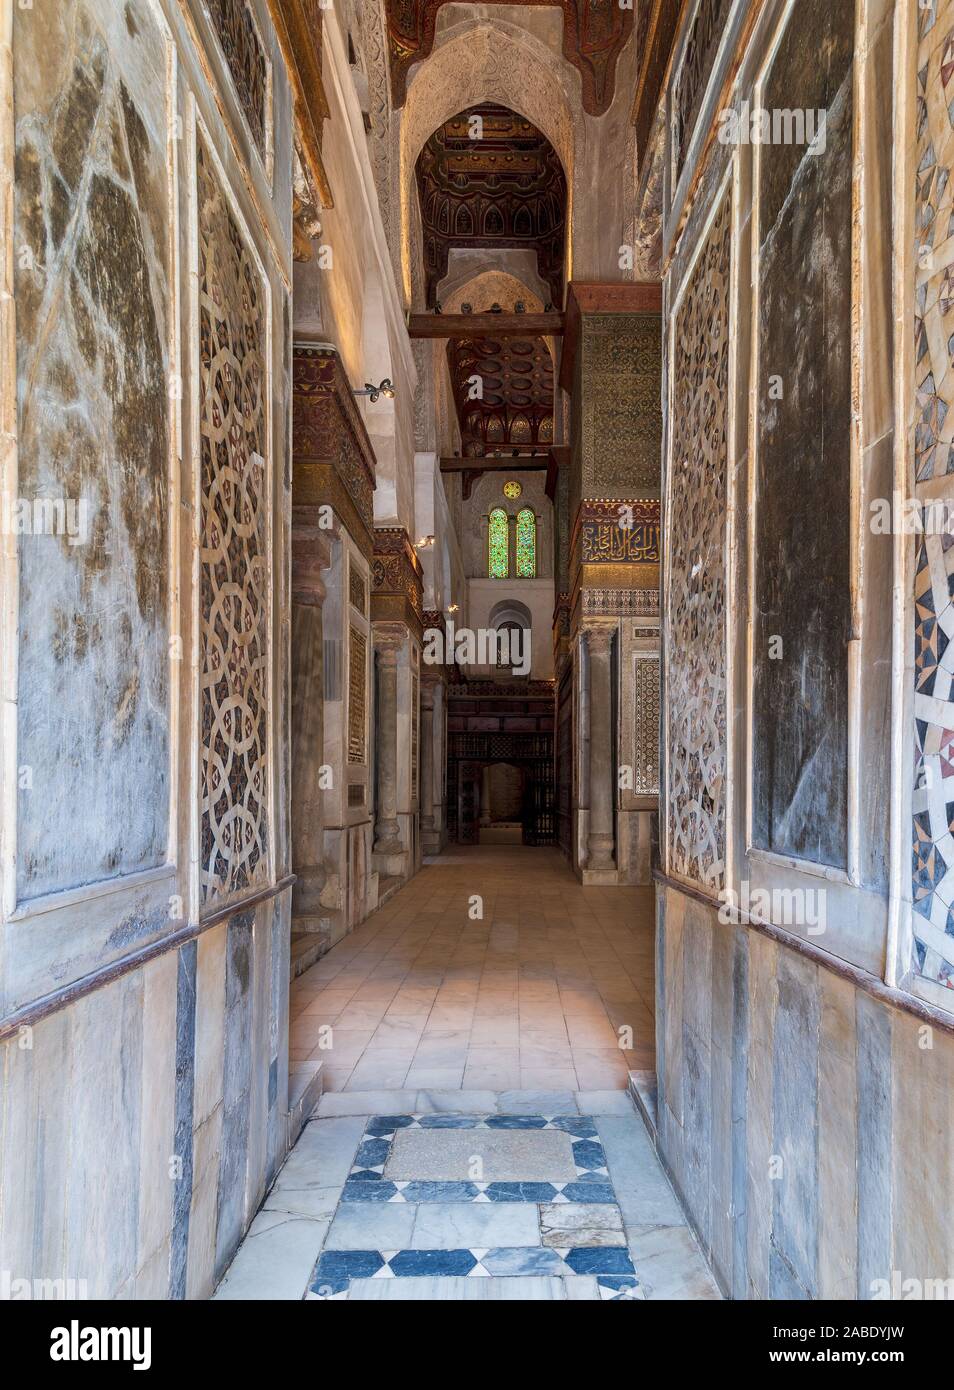 Passage with decorated marble walls at the Mausoleum of Sultan Qalawun, part of Sultan Qalawun Complex, located in Al Moez Street, Old Cairo, Egypt Stock Photo